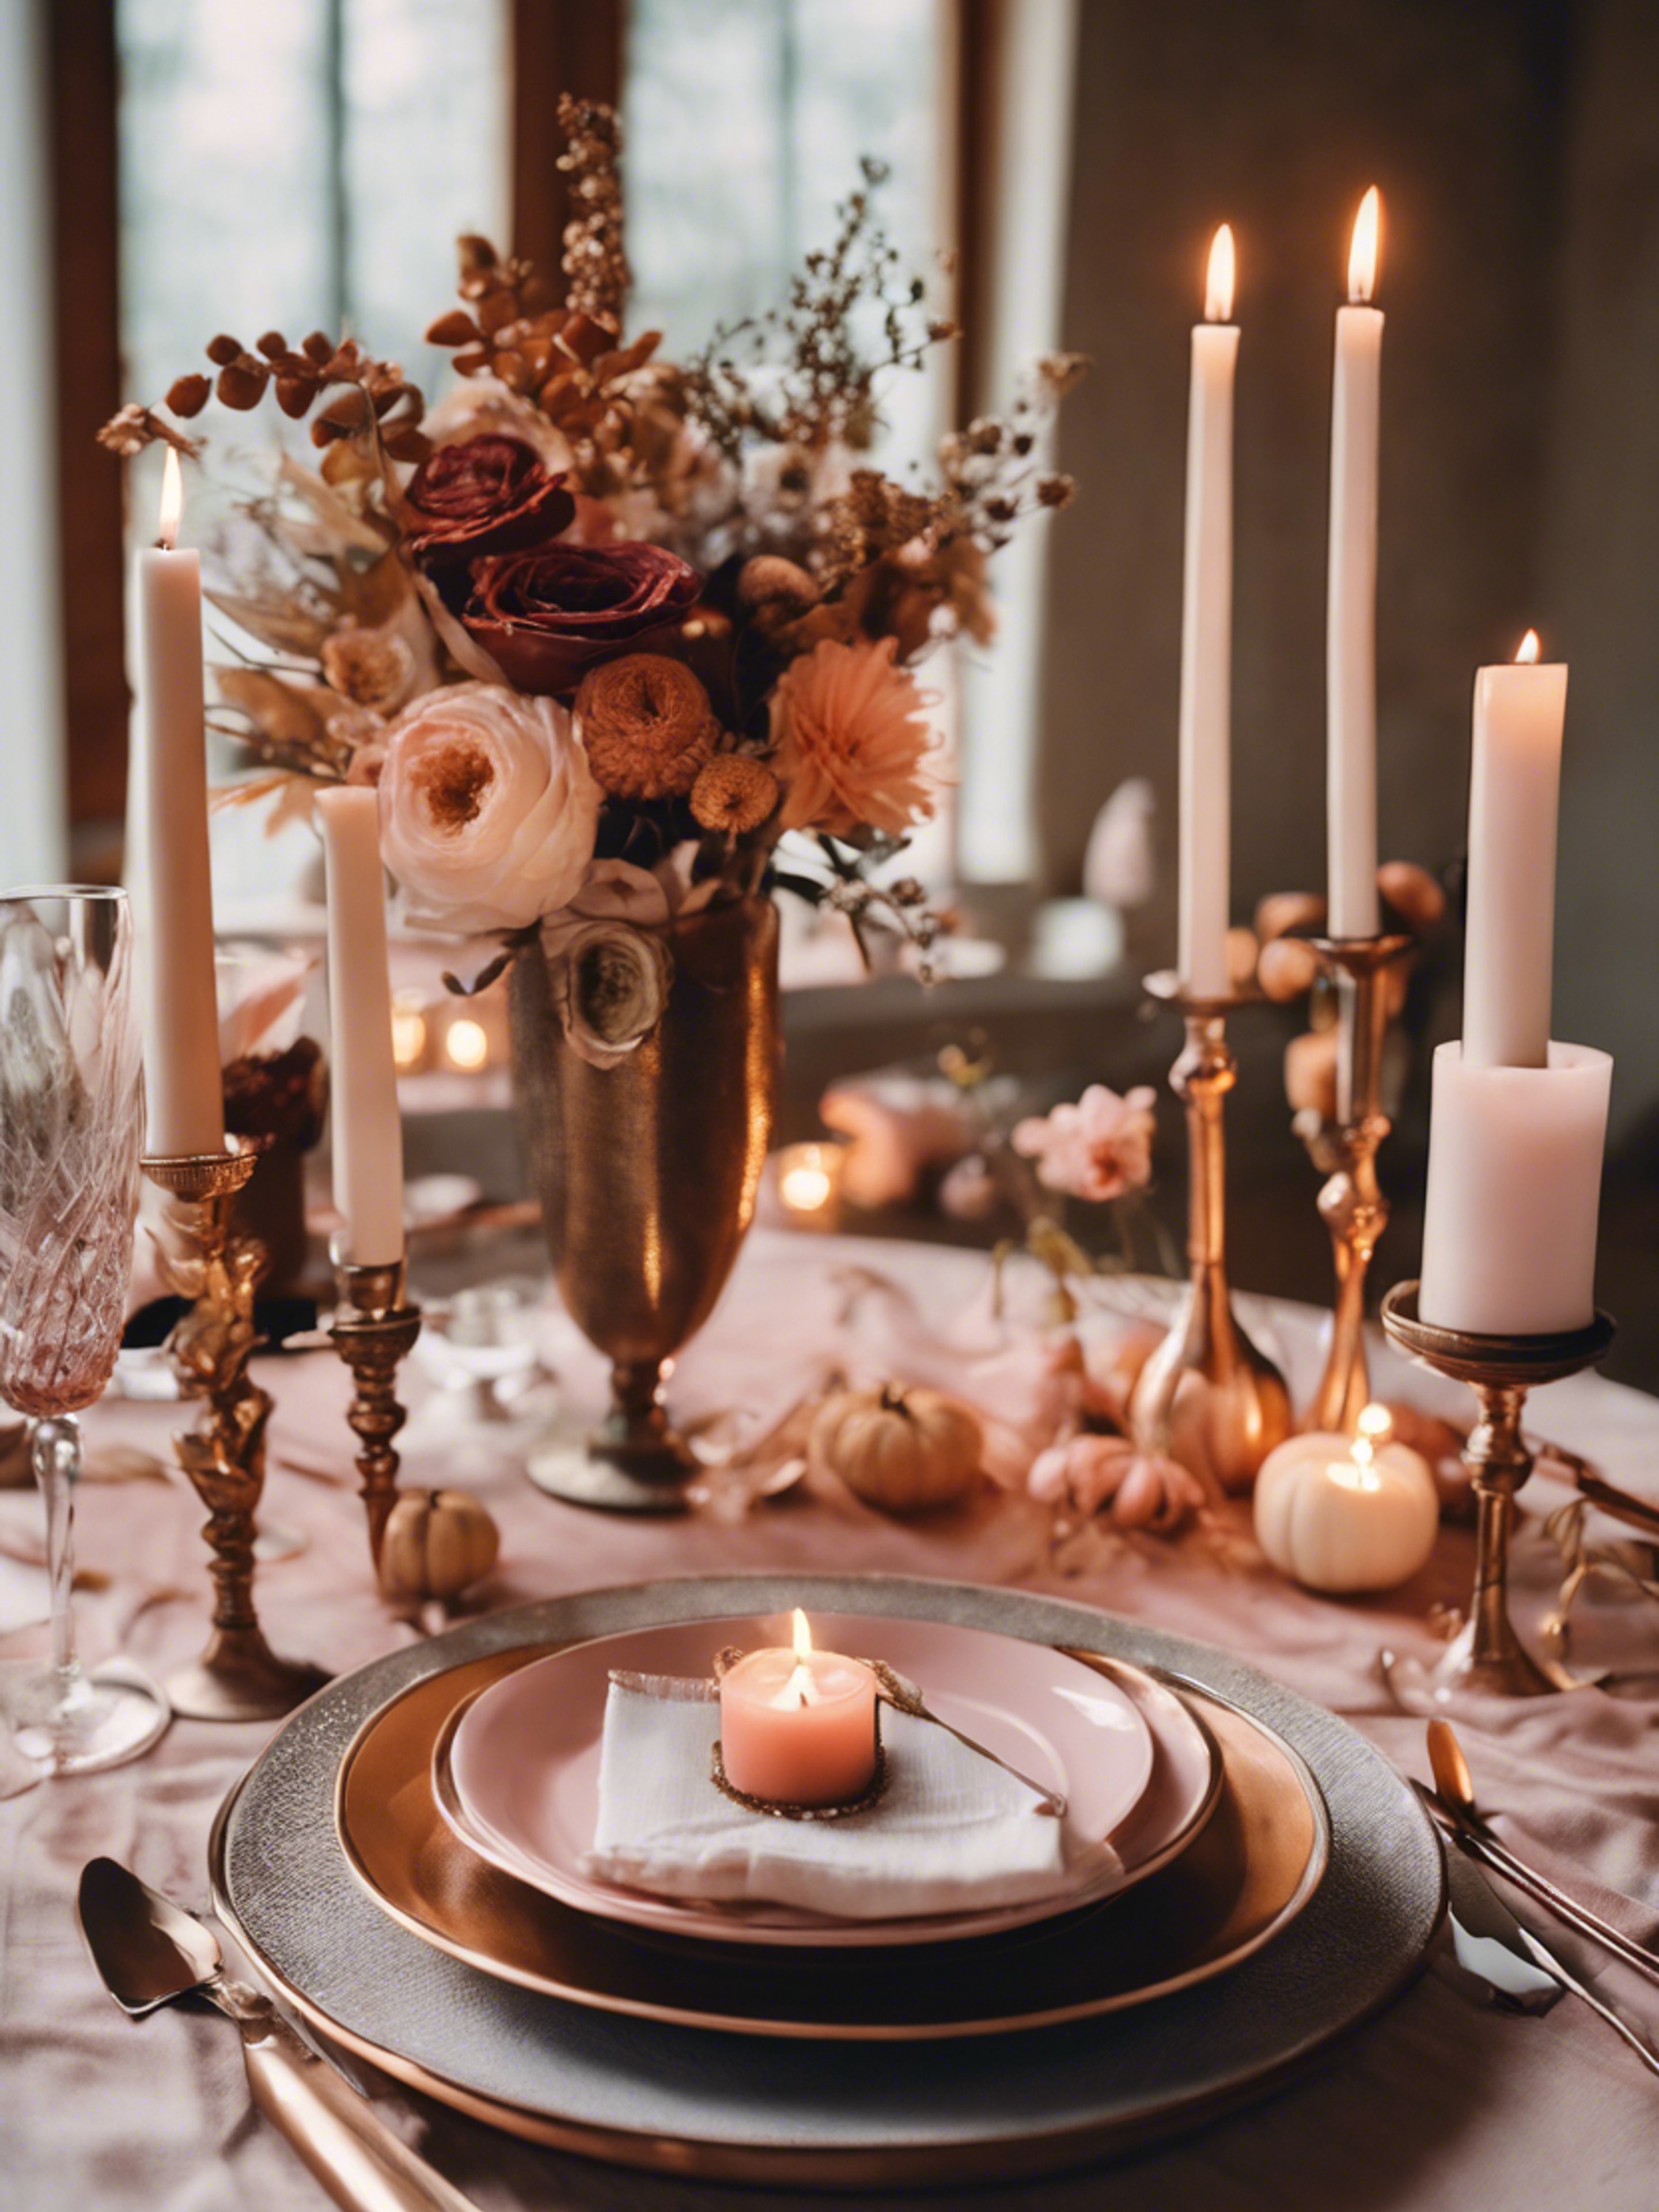 A romantic Thanksgiving tablescape for two, adorned with blush-colored candles, copper utensils, and a gorgeous floral centerpiece. Kertas dinding[bc0a53f0db0f4071a53b]